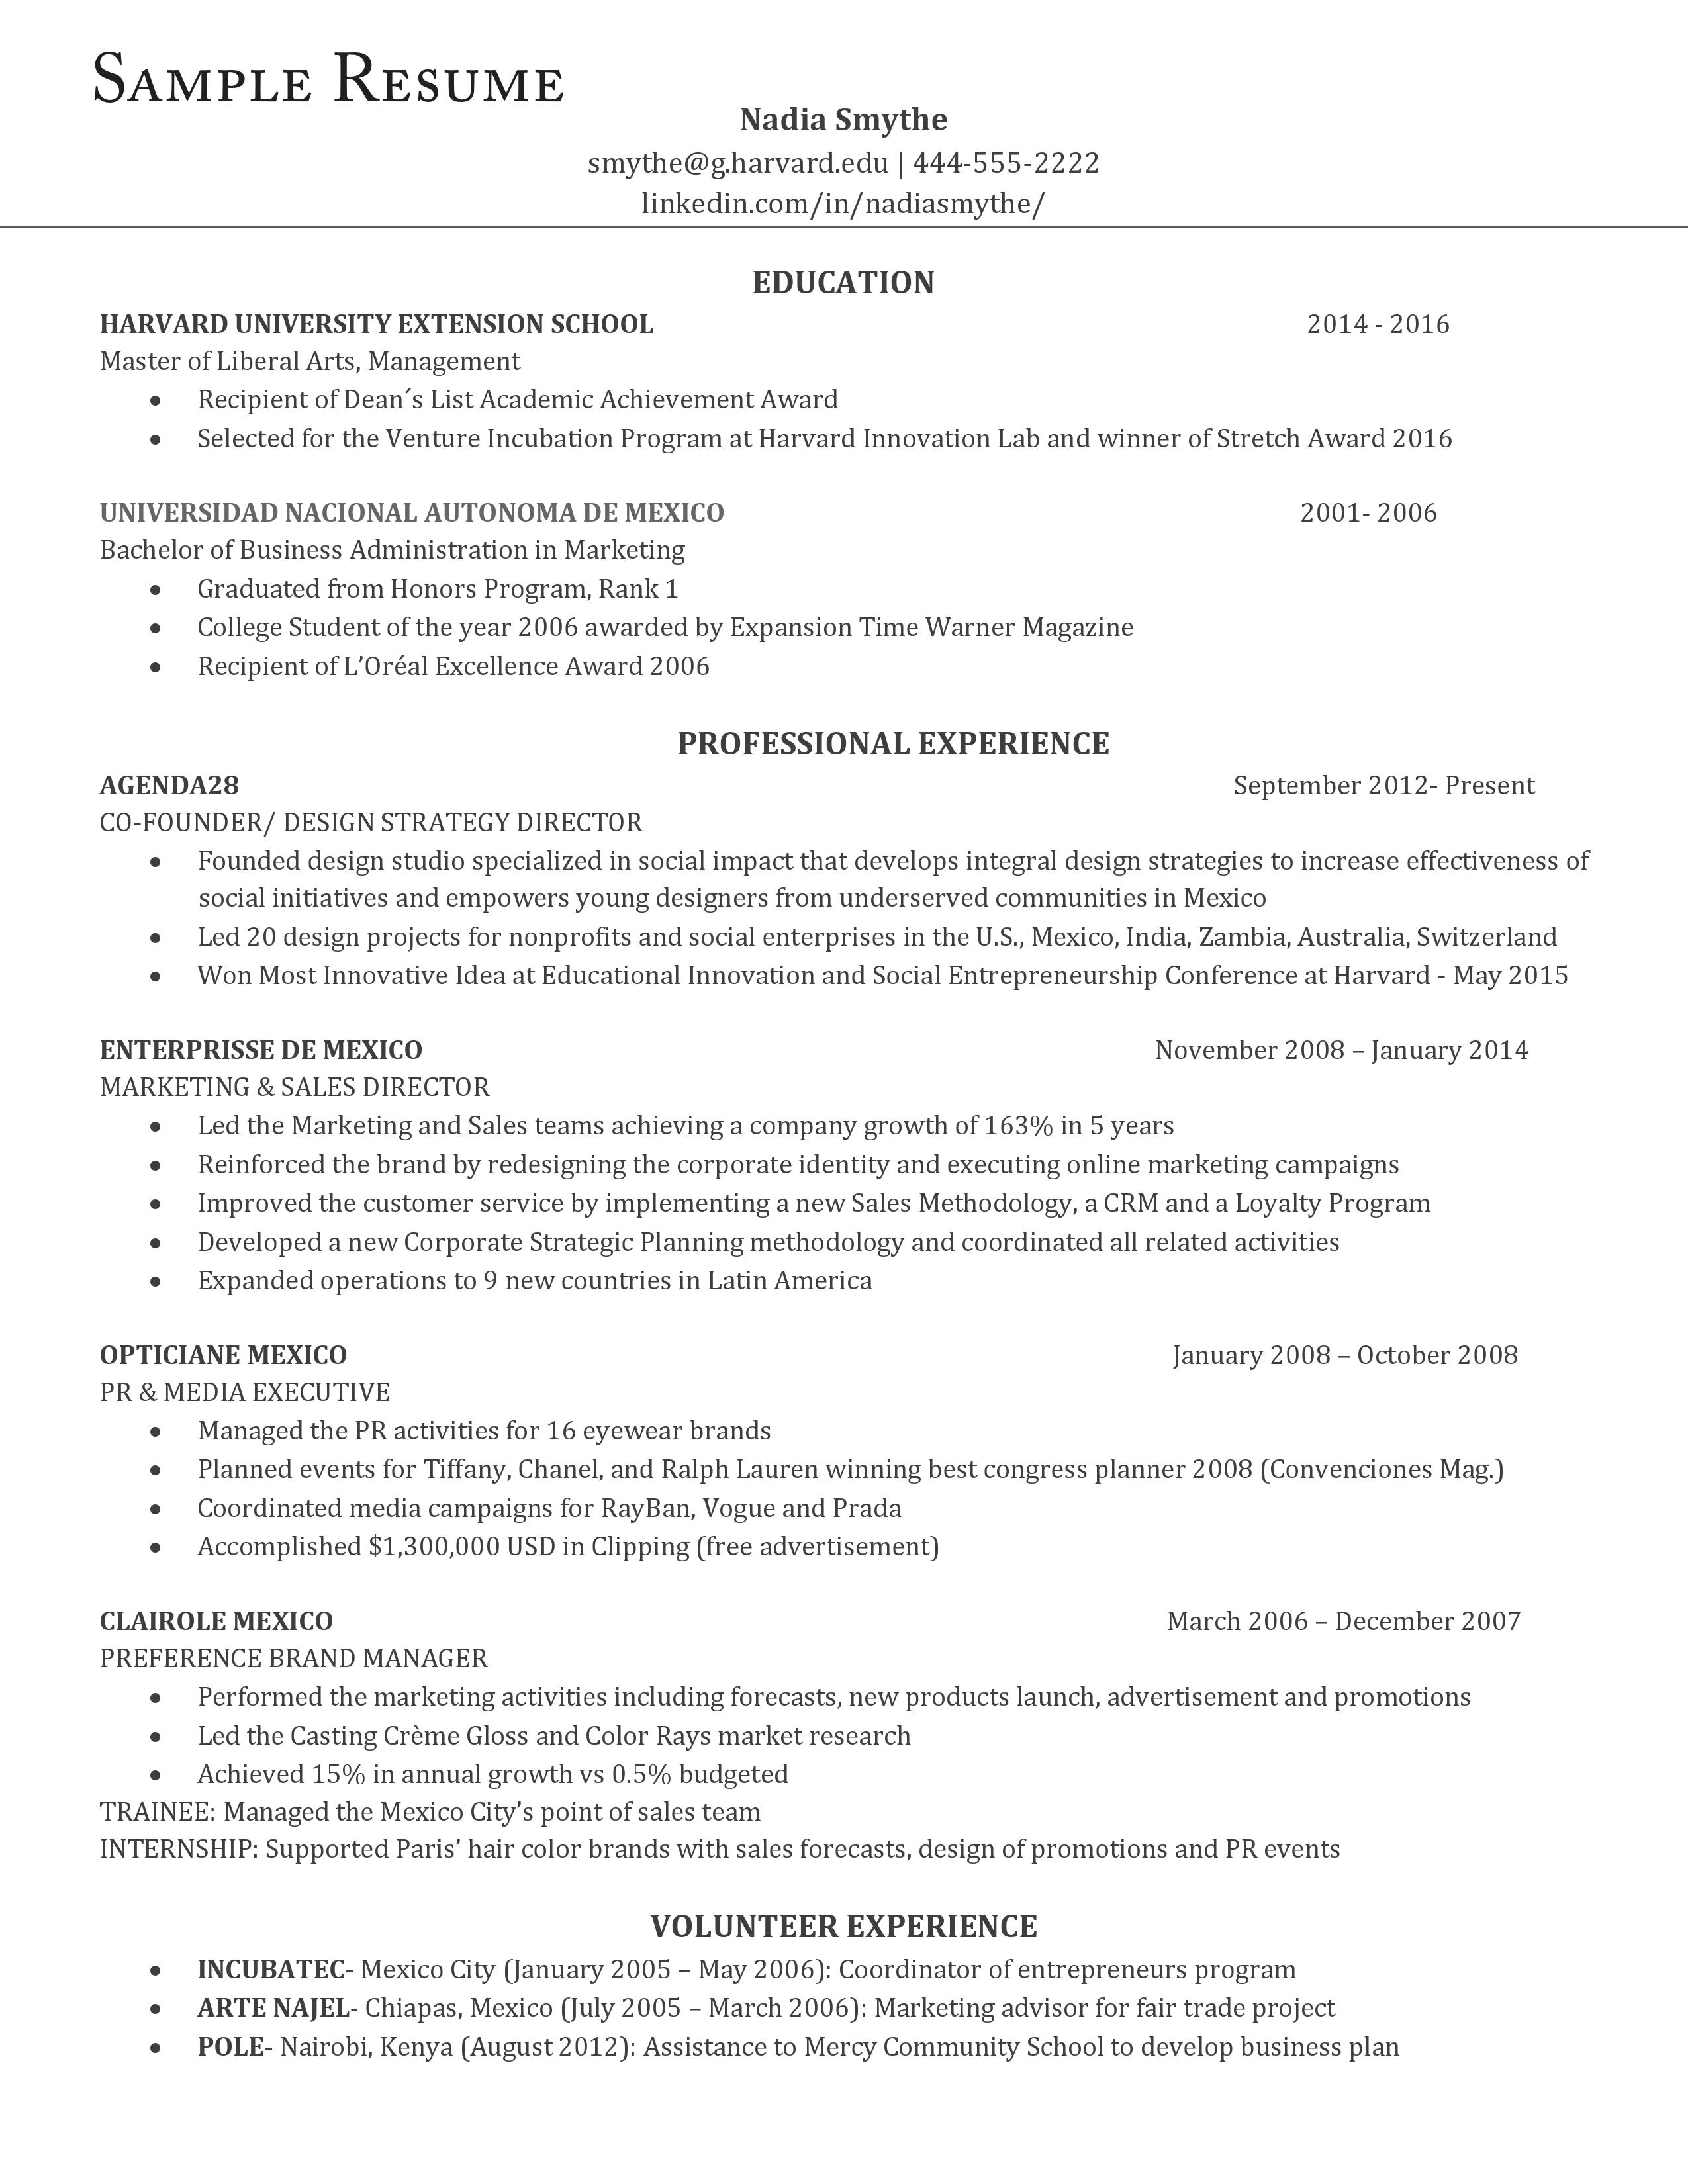 Cv Format For Law Students Pdf from fm-static.cnbc.com